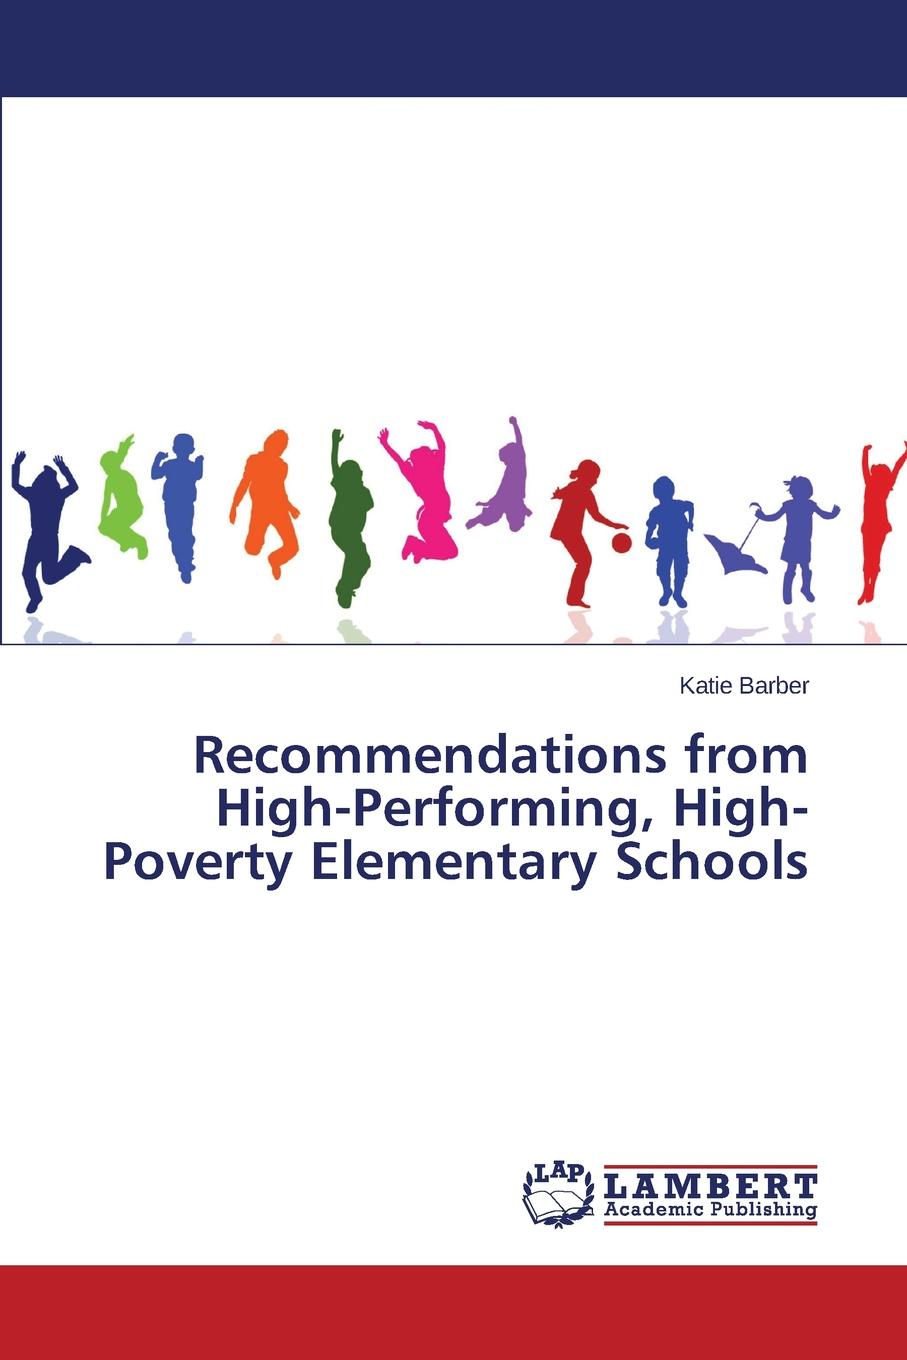 Recommendations from High-Performing, High-Poverty Elementary Schools